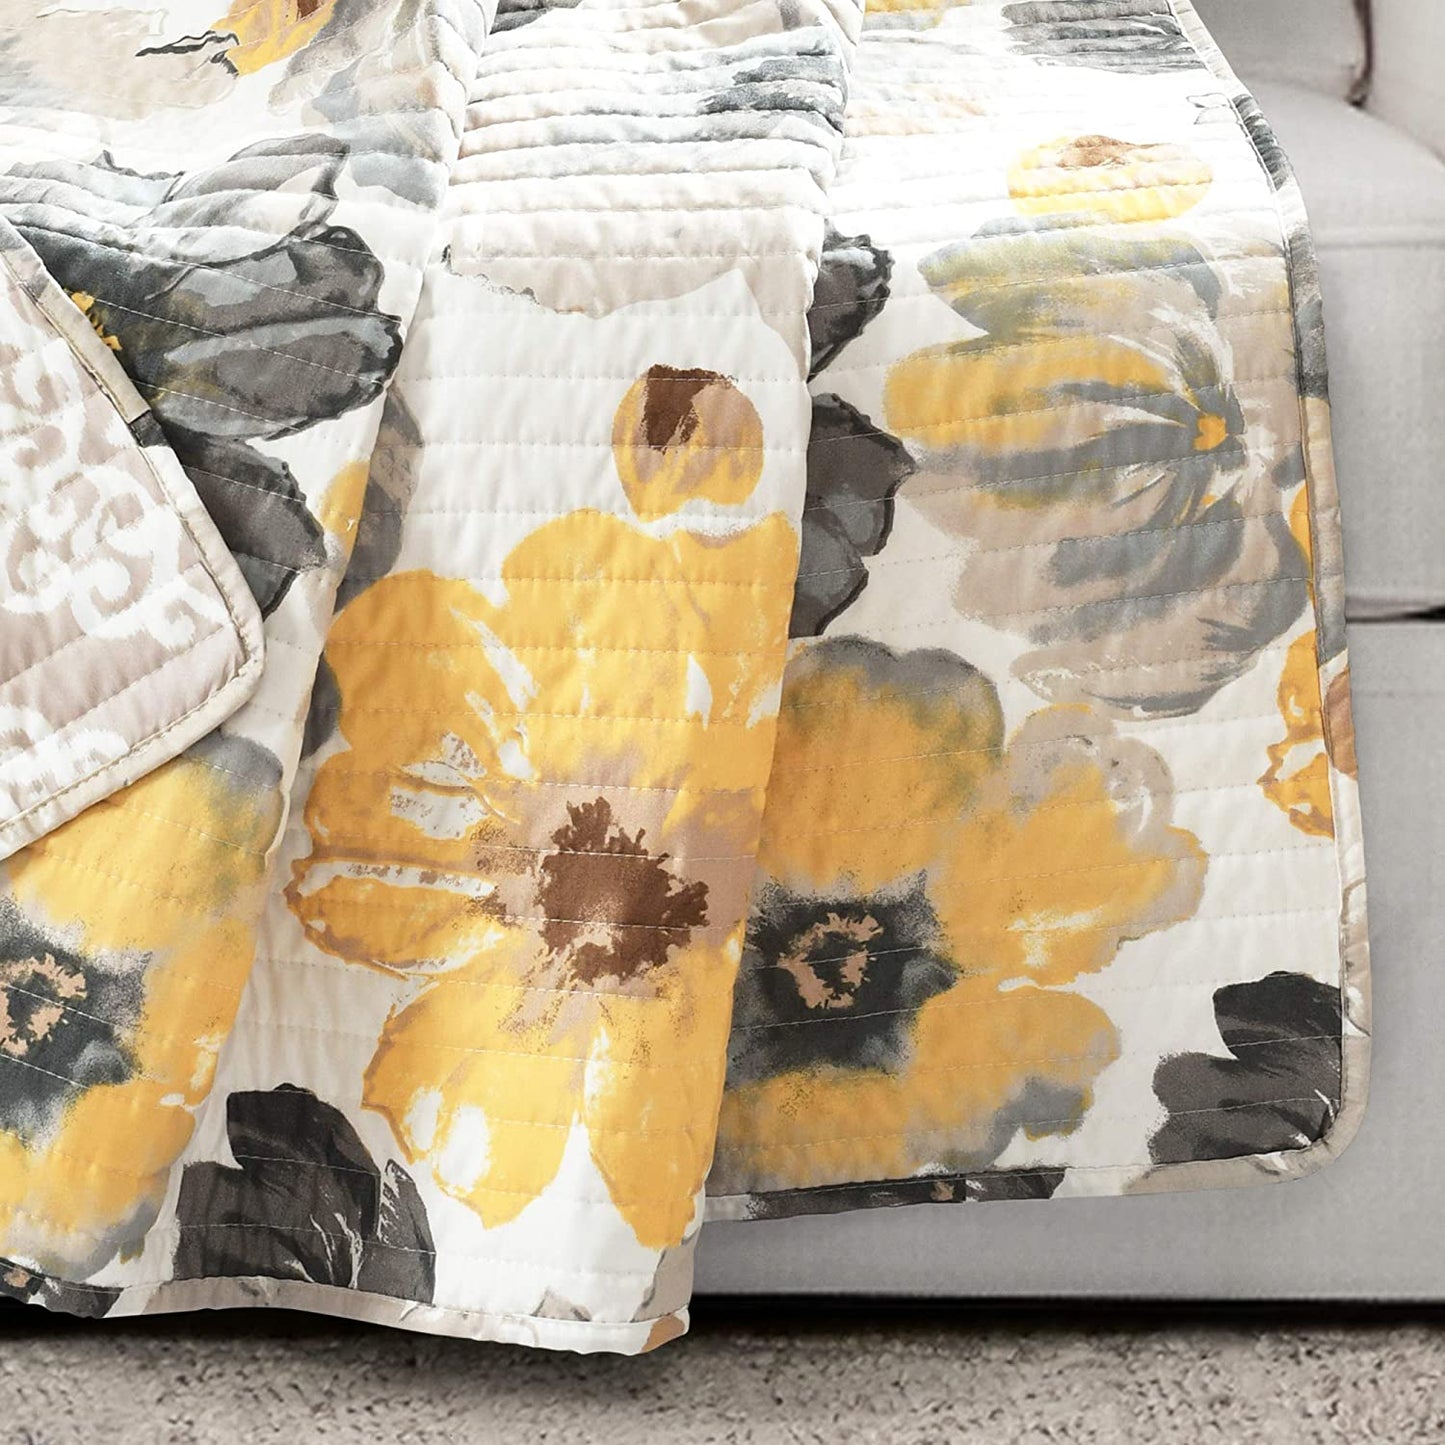 Yellow & Gray Splash-Ink Painting Floral Patchwork 3 Pieces Quilt Set Coverlet with 2 Pillowcasess